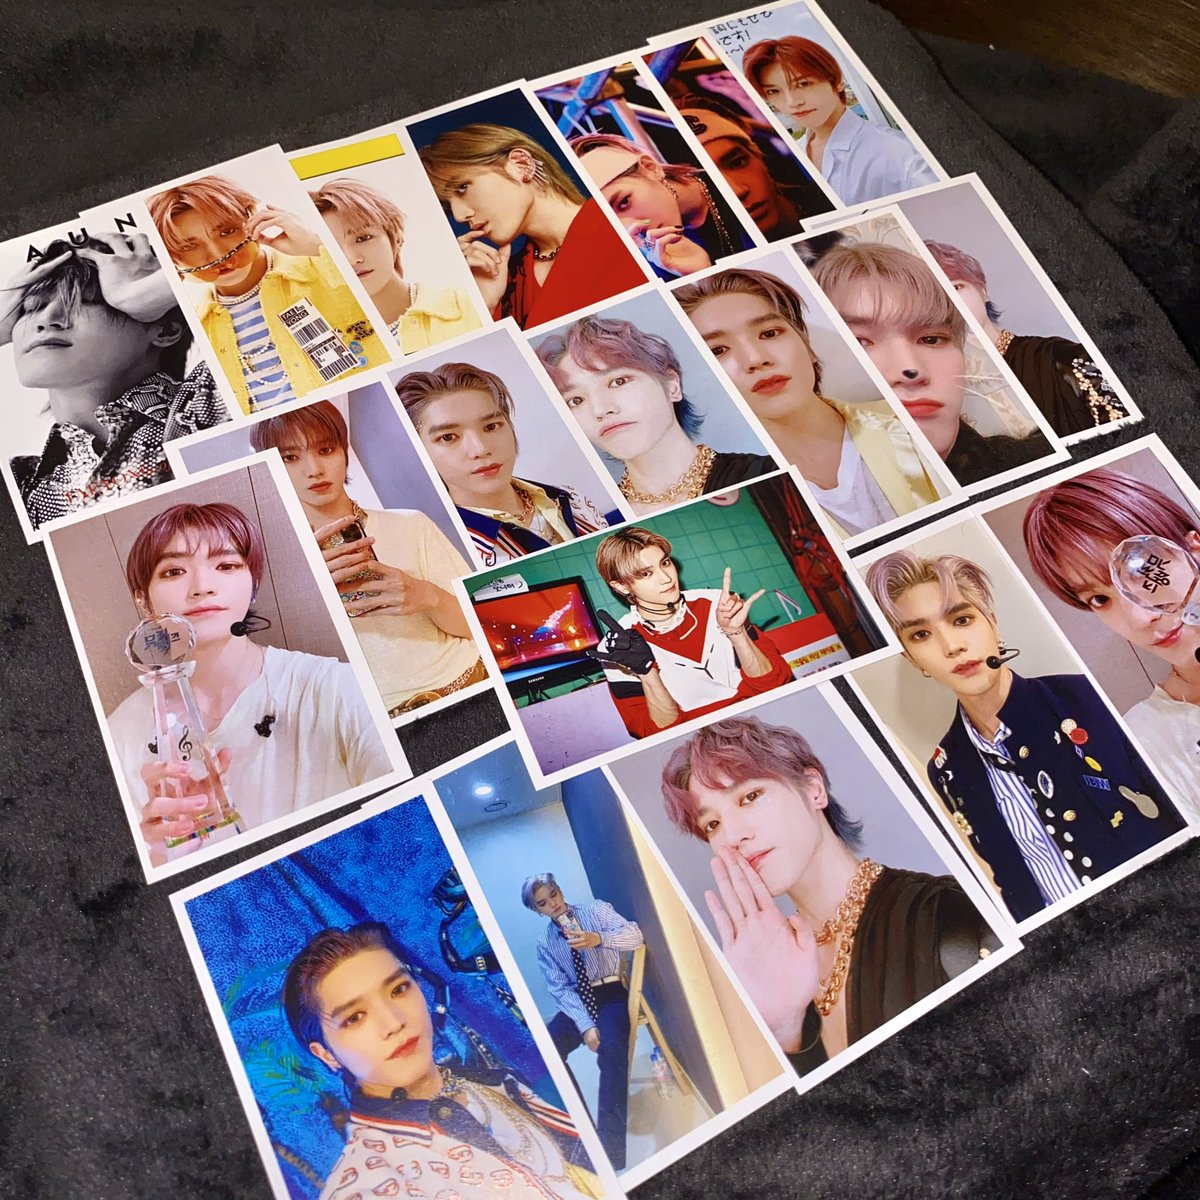  TAEYONG  #TyongfTime GIVEAWAY — 10 winners in total — each winner gets a set of 3 cards— open worldwide — ends 9th may 2021 this giveaway is to promote his songs on tiktok, details below! please retweet this <3  #TAEYONG  #태용  #NCT태용